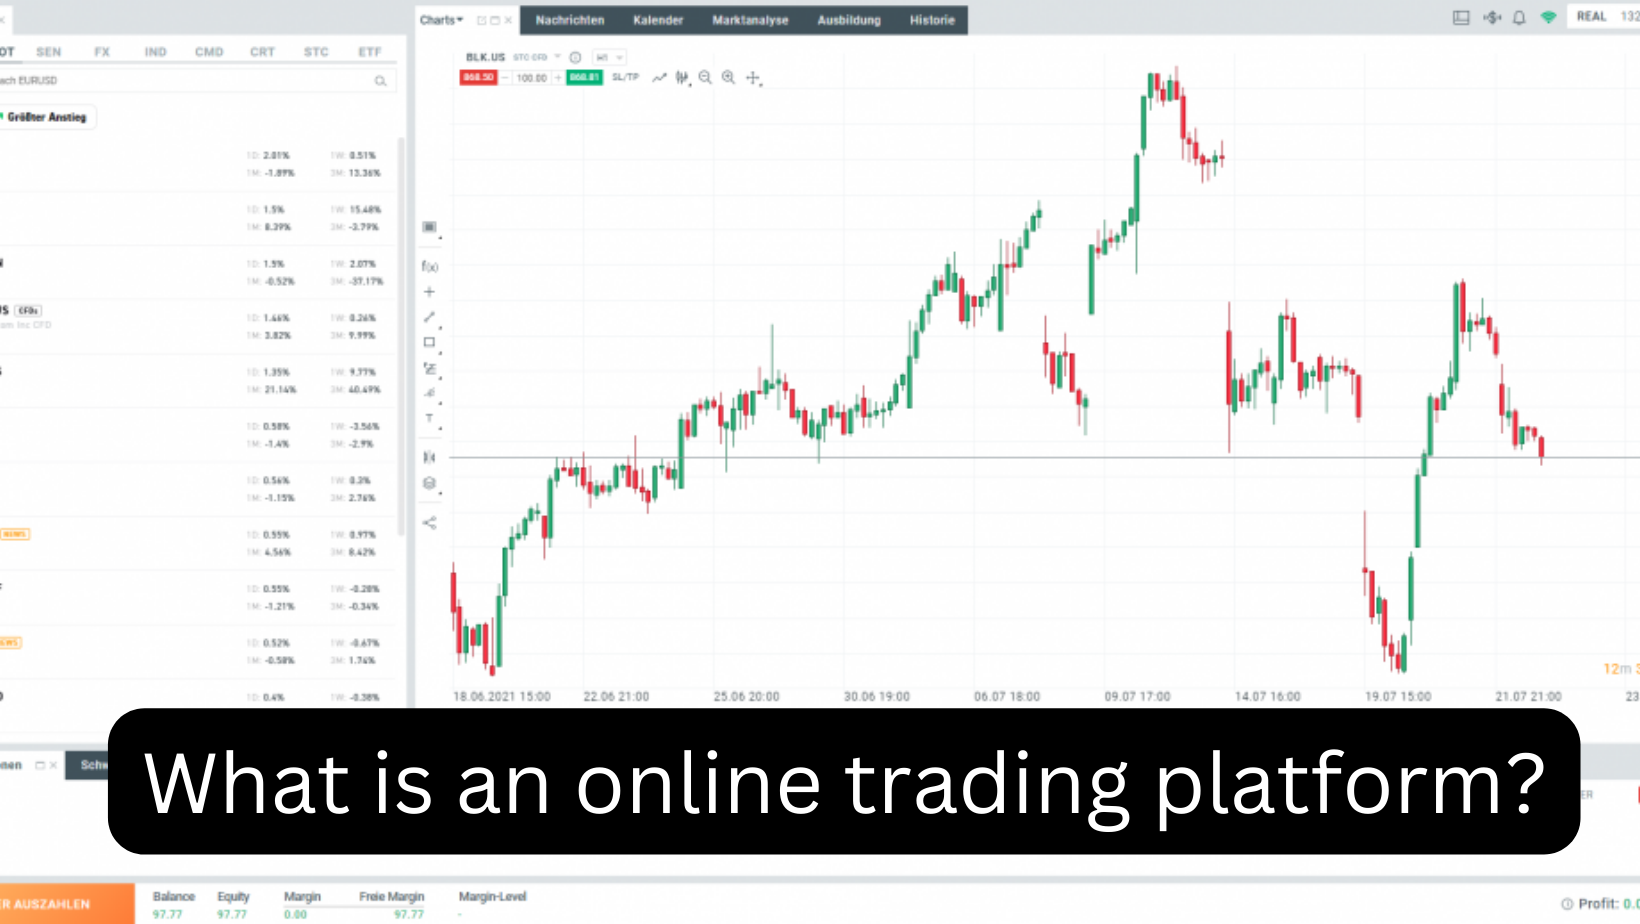 What is an online trading platform?